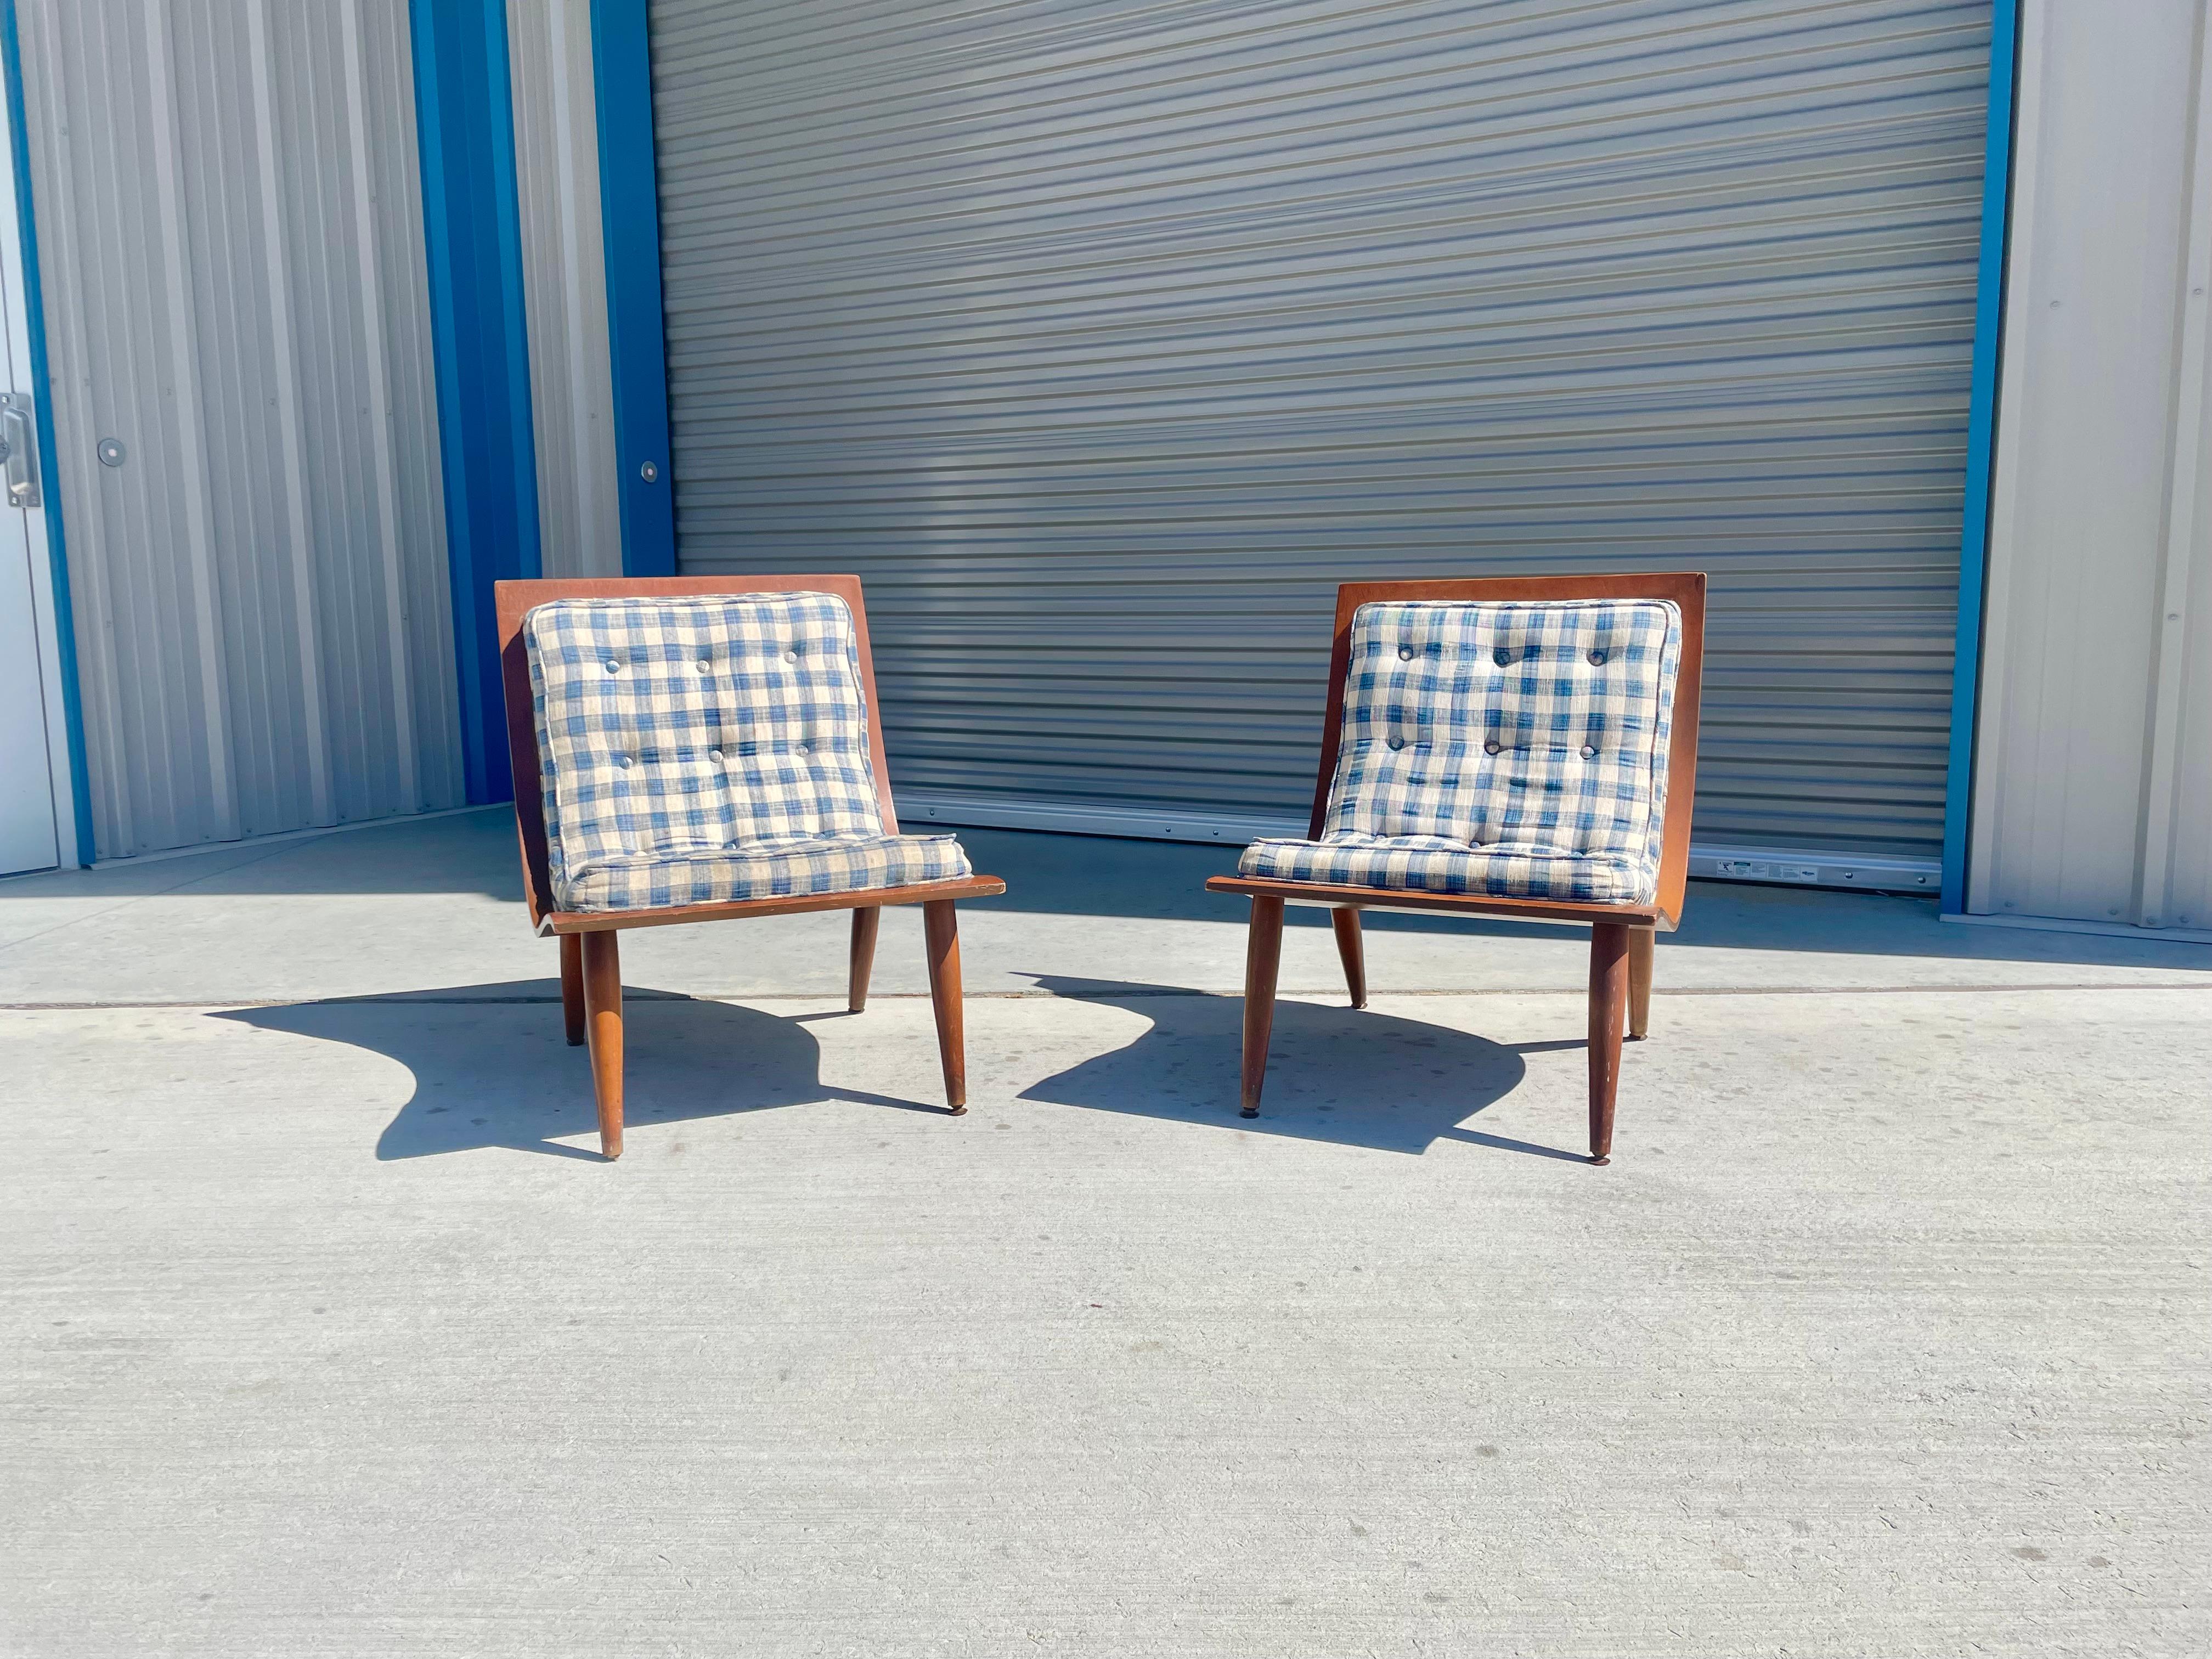 Vintage scoop lounge chairs manufactured by Carter Brothers, circa the 1950s. This midcentury pair of scoop chairs feature a sleek design covered in blue and white pattern upholstery with a walnut back. The chairs also have a unique wave shape